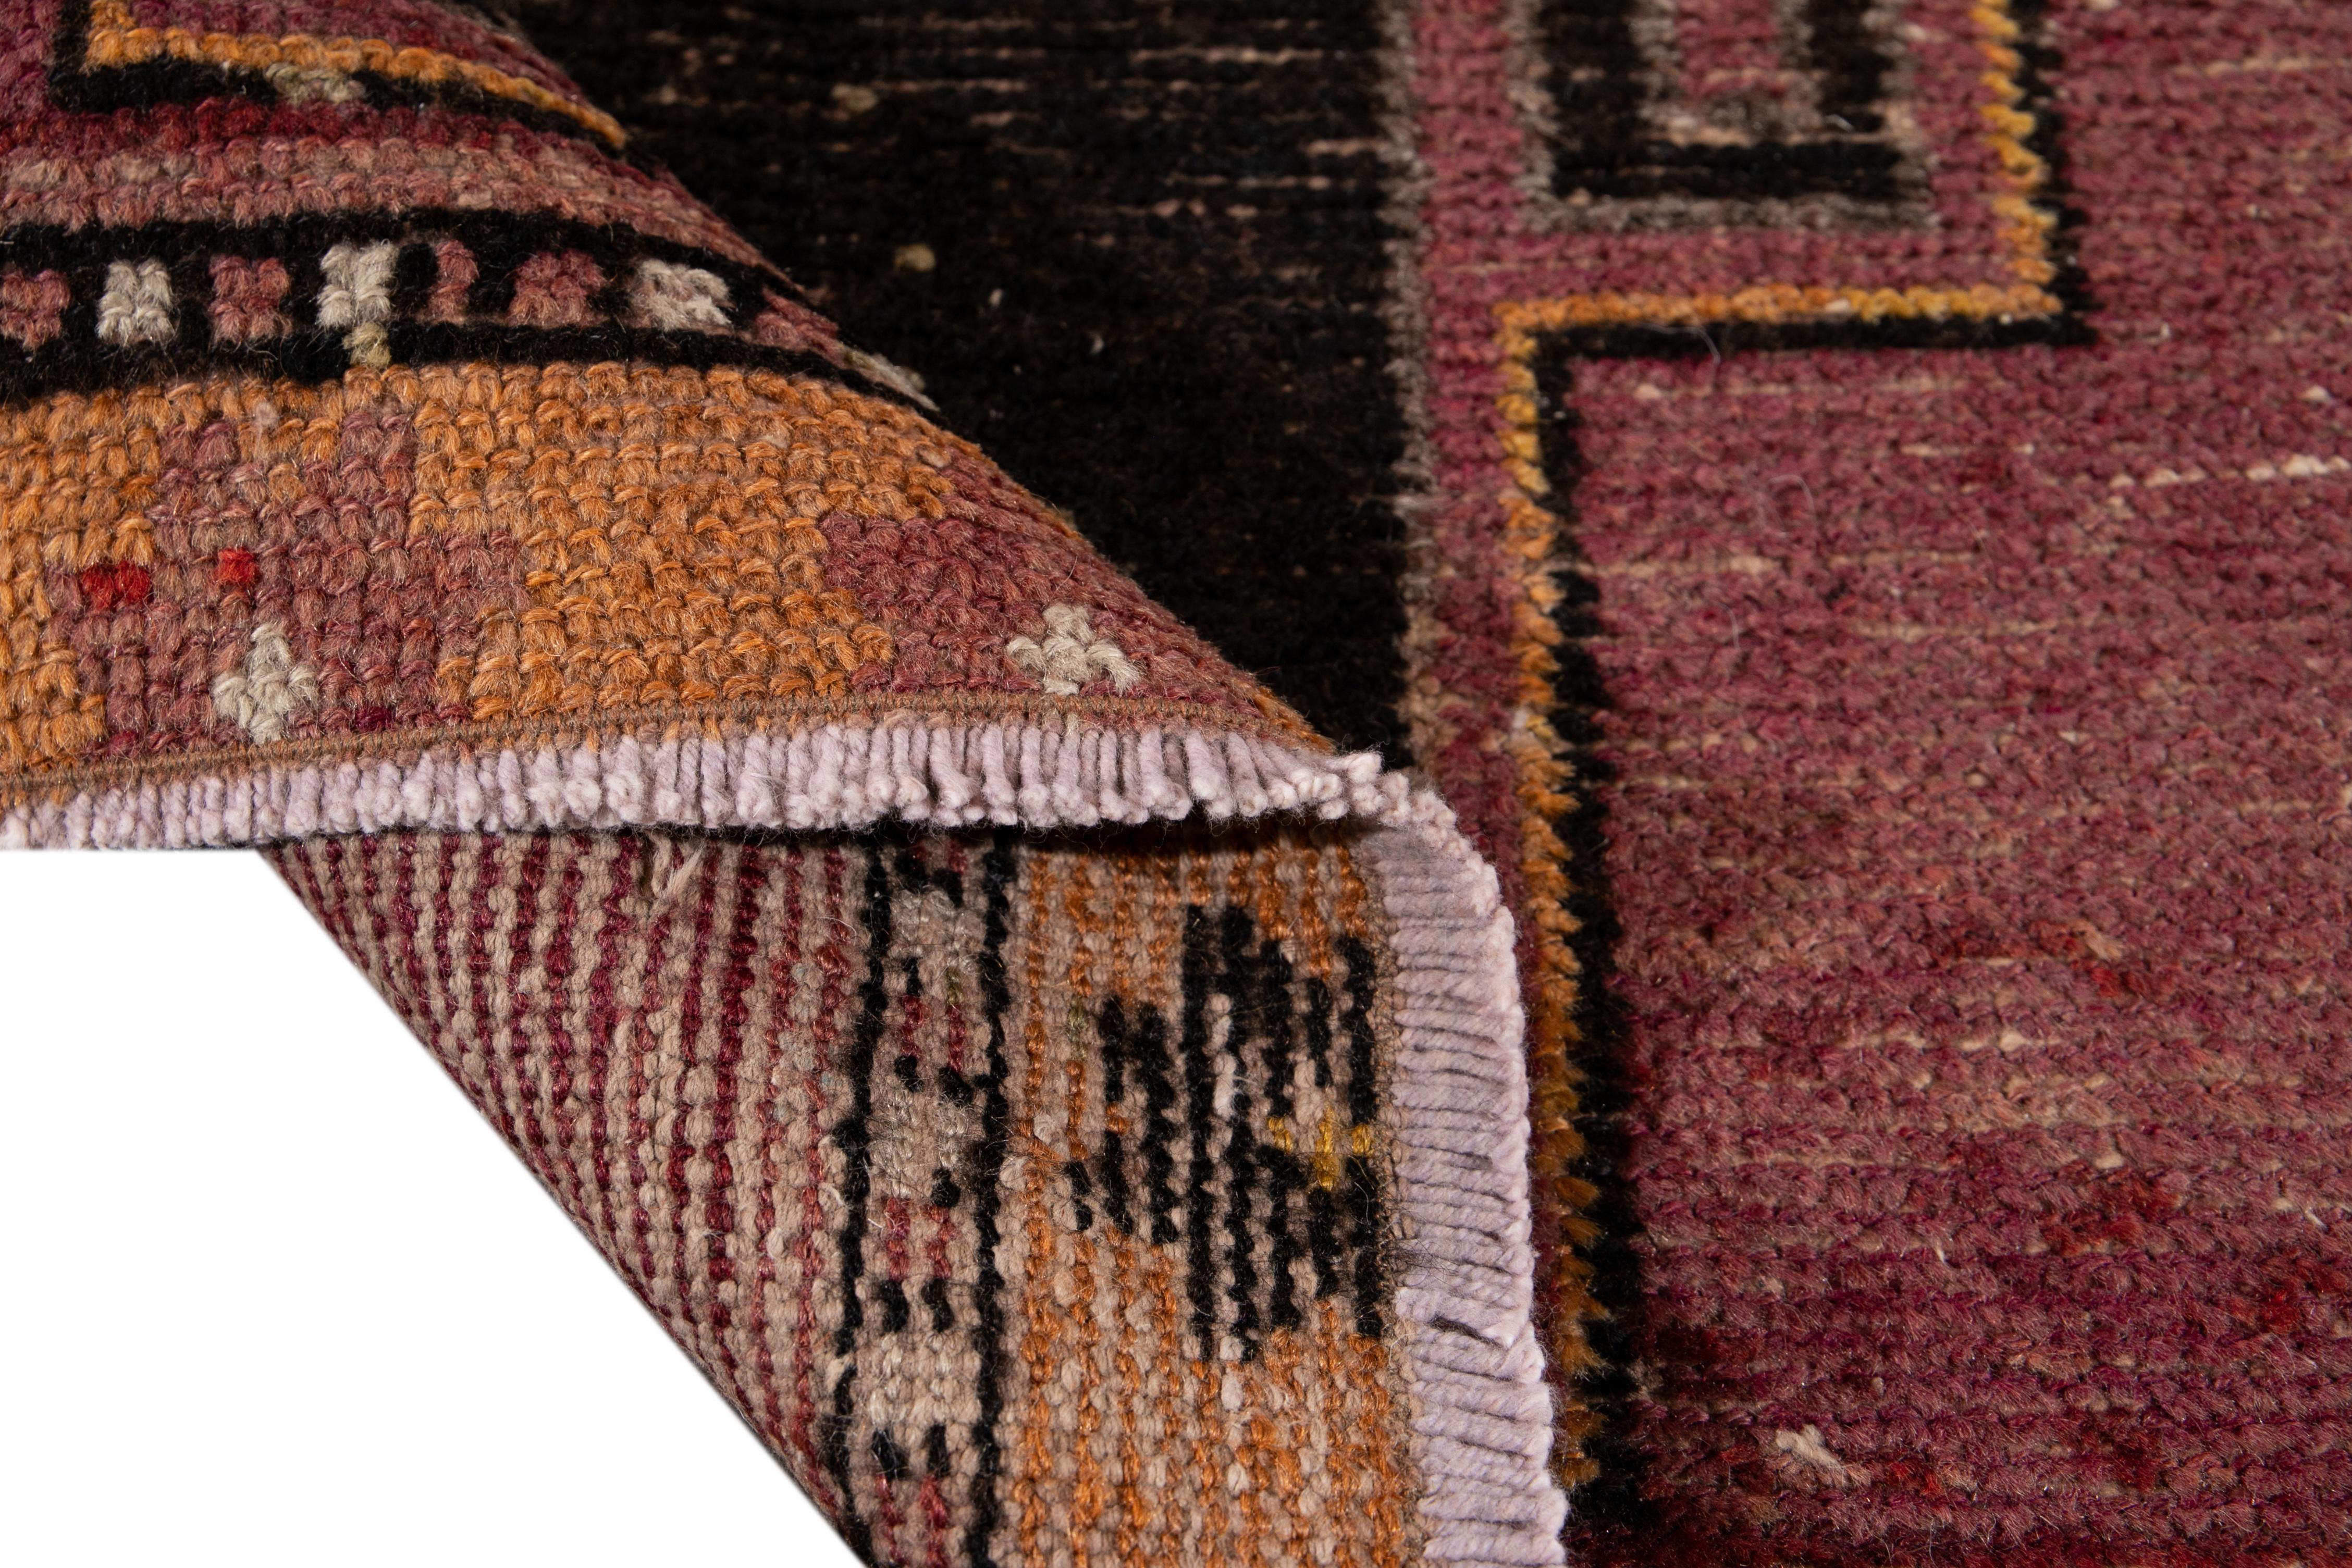 Beautiful vintage Turkish hand knotted wool rug with a burgundy field. This rug has accents of black, orange, and brown in a gorgeous all-over geometric Tribal design,

This rug measures: 3' x 9'2